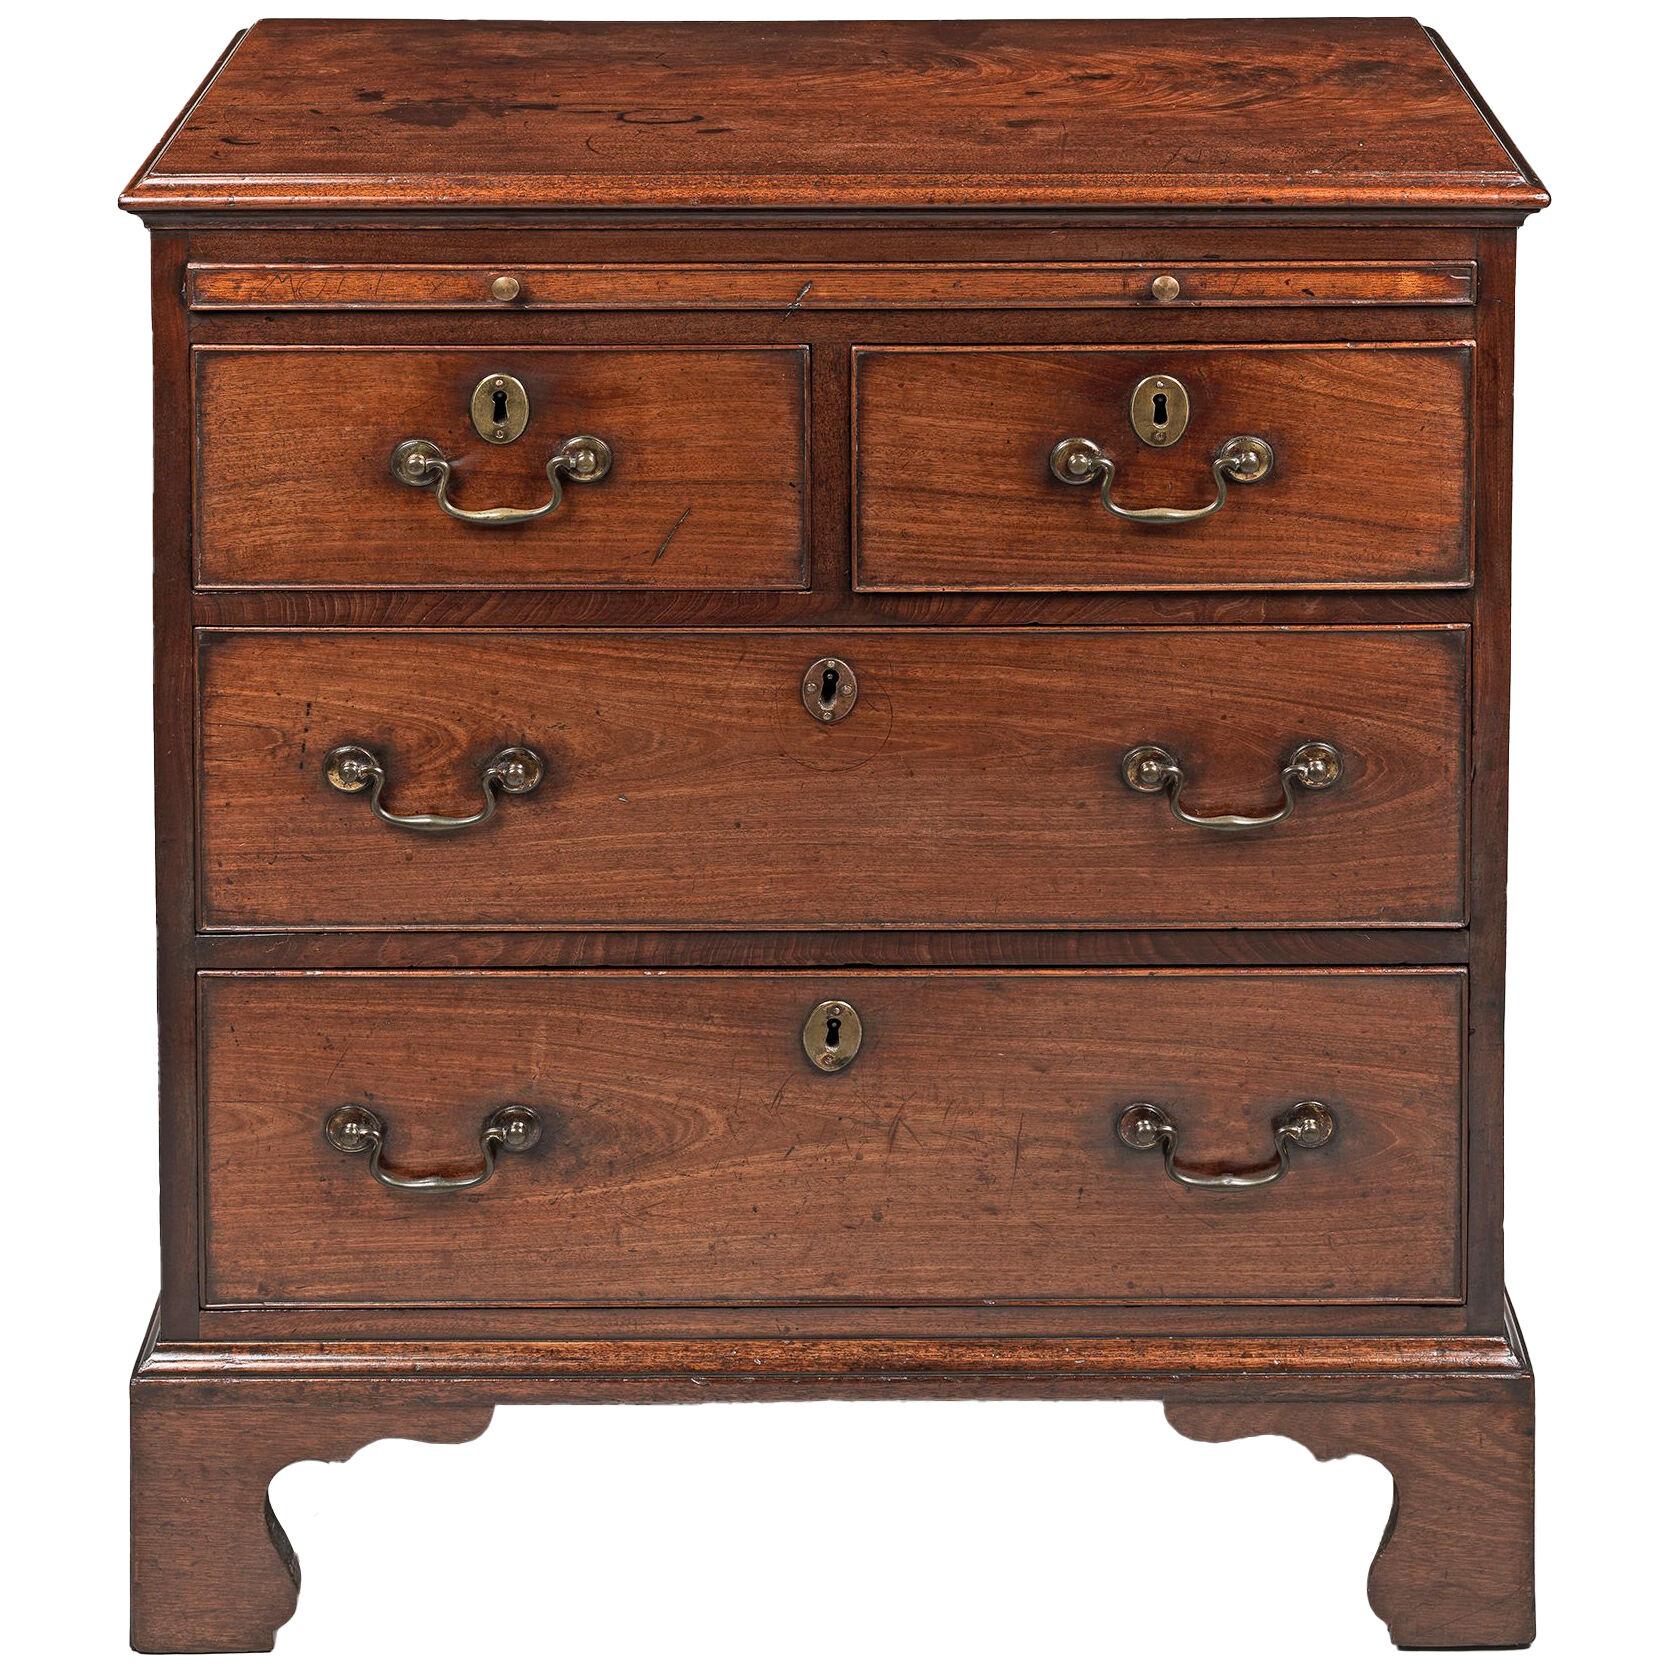 Small early Georgian mahogany chest of drawers